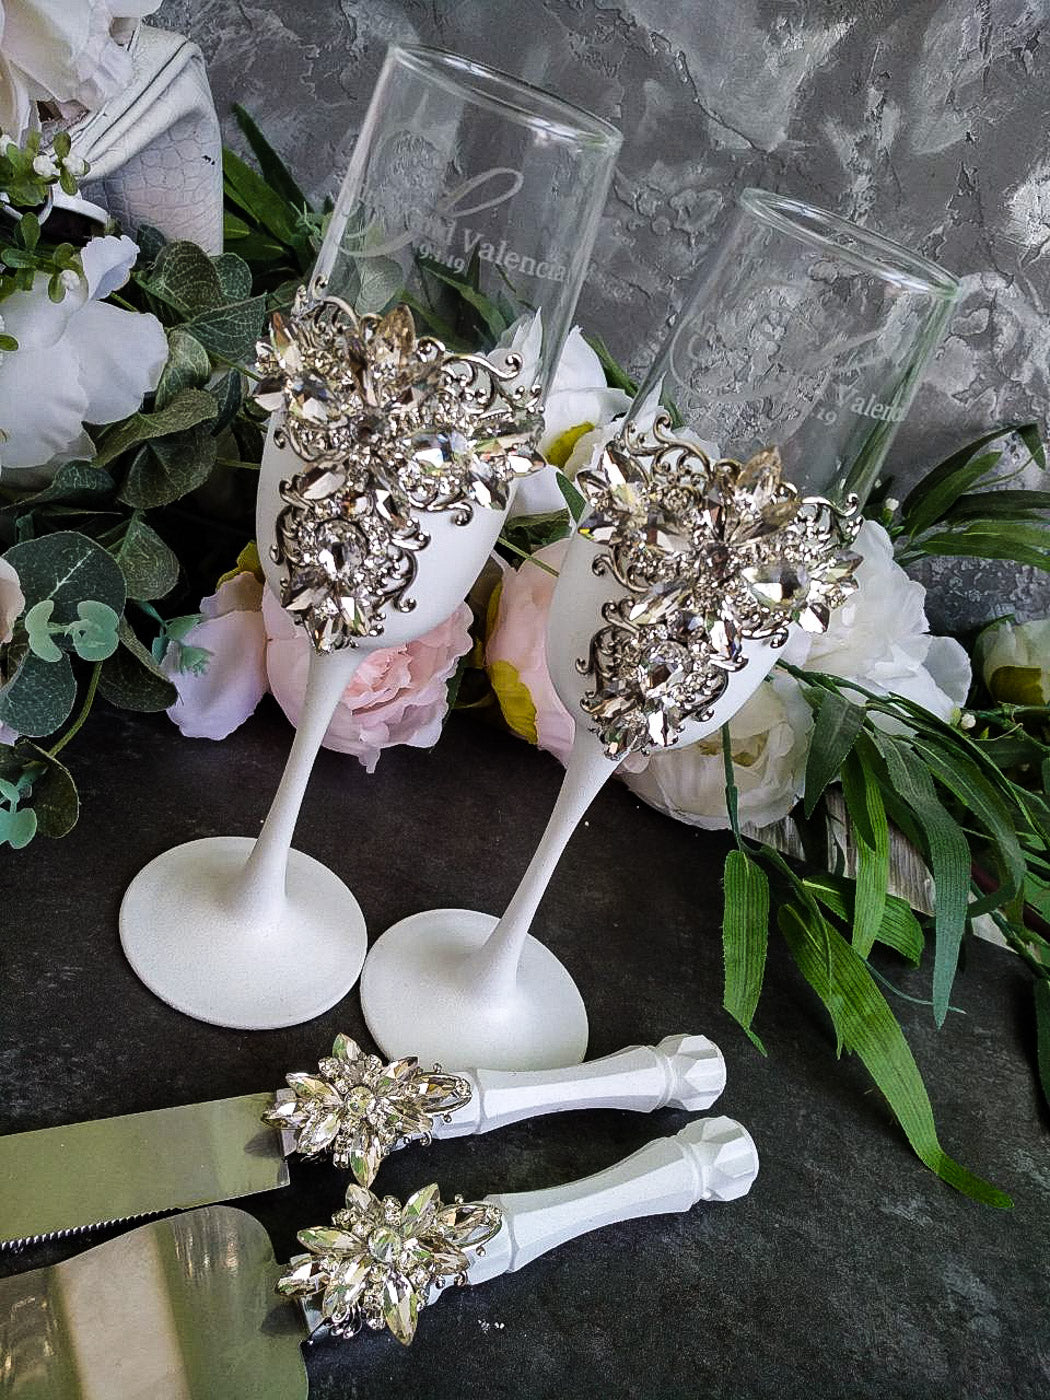 White and Silver Wedding Toast Glasses and Cake Serving Set on display